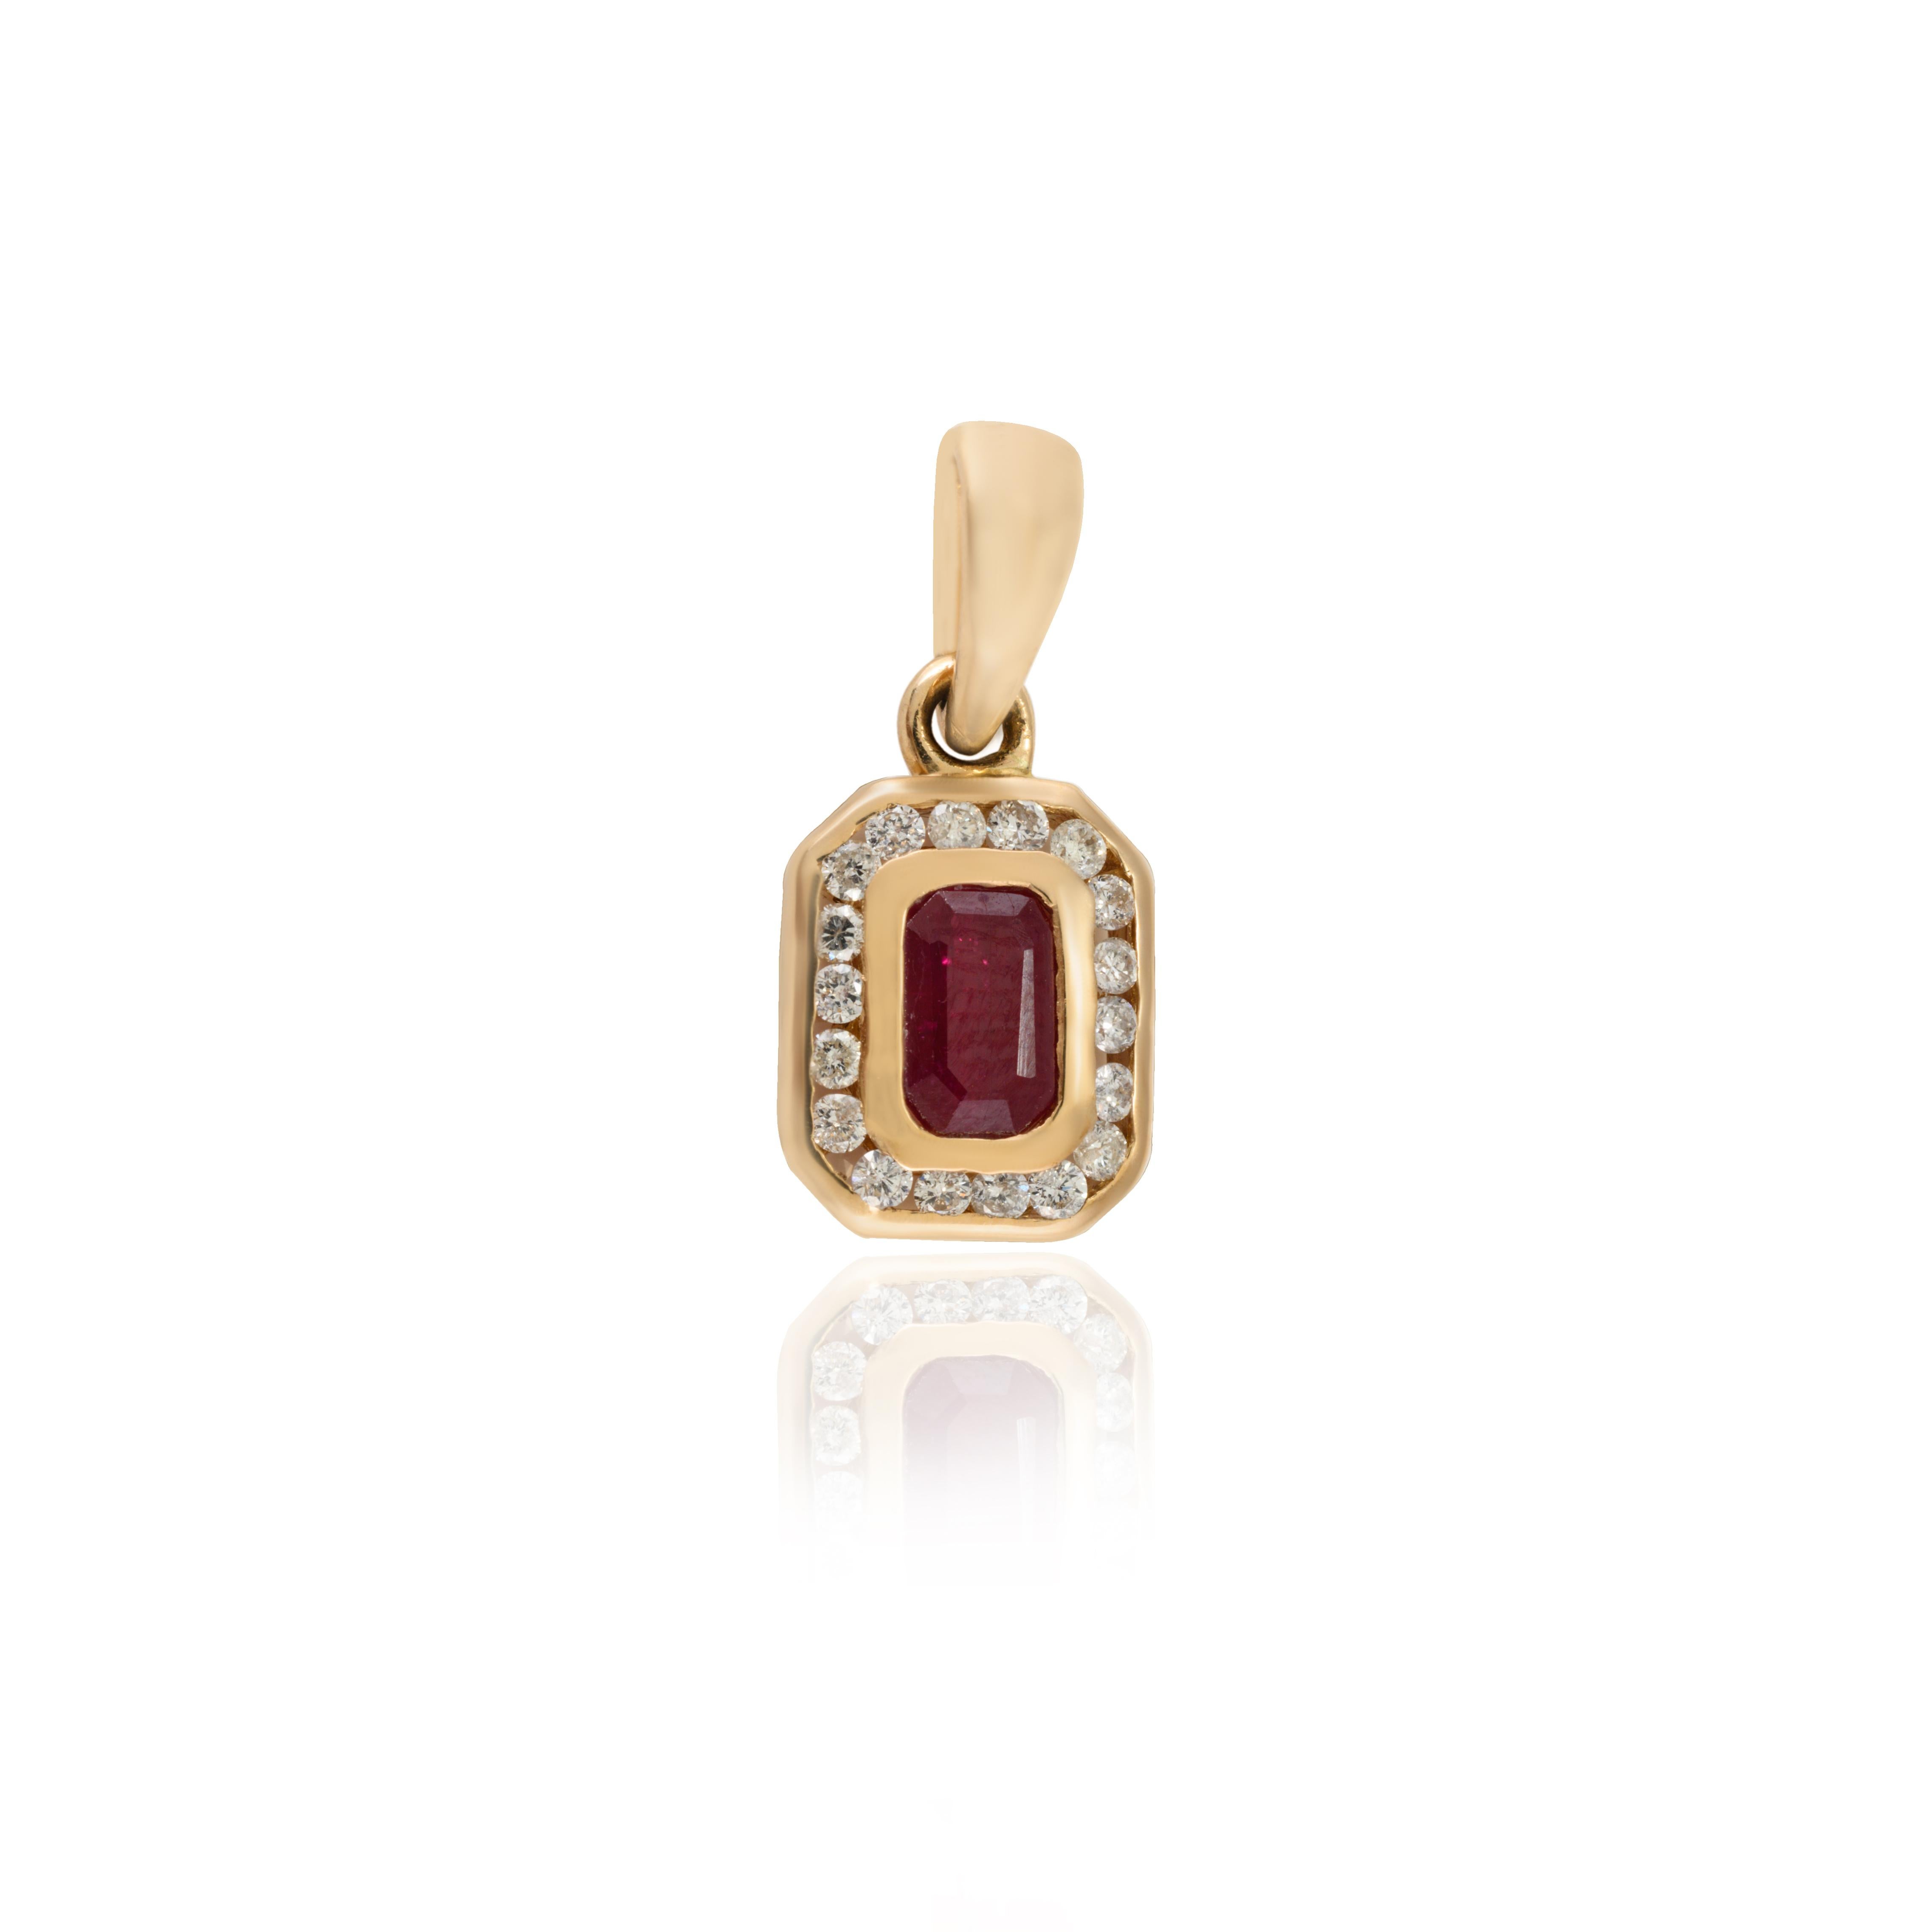 Art Deco Octagon ut Ruby and Diamond Halo Pendant in 14K Gold studded with octagon cut ruby. This stunning piece of jewelry instantly elevates a casual look or dressy outfit. 
Ruby improves mental strength. 
Designed with octagon cut ruby studded in